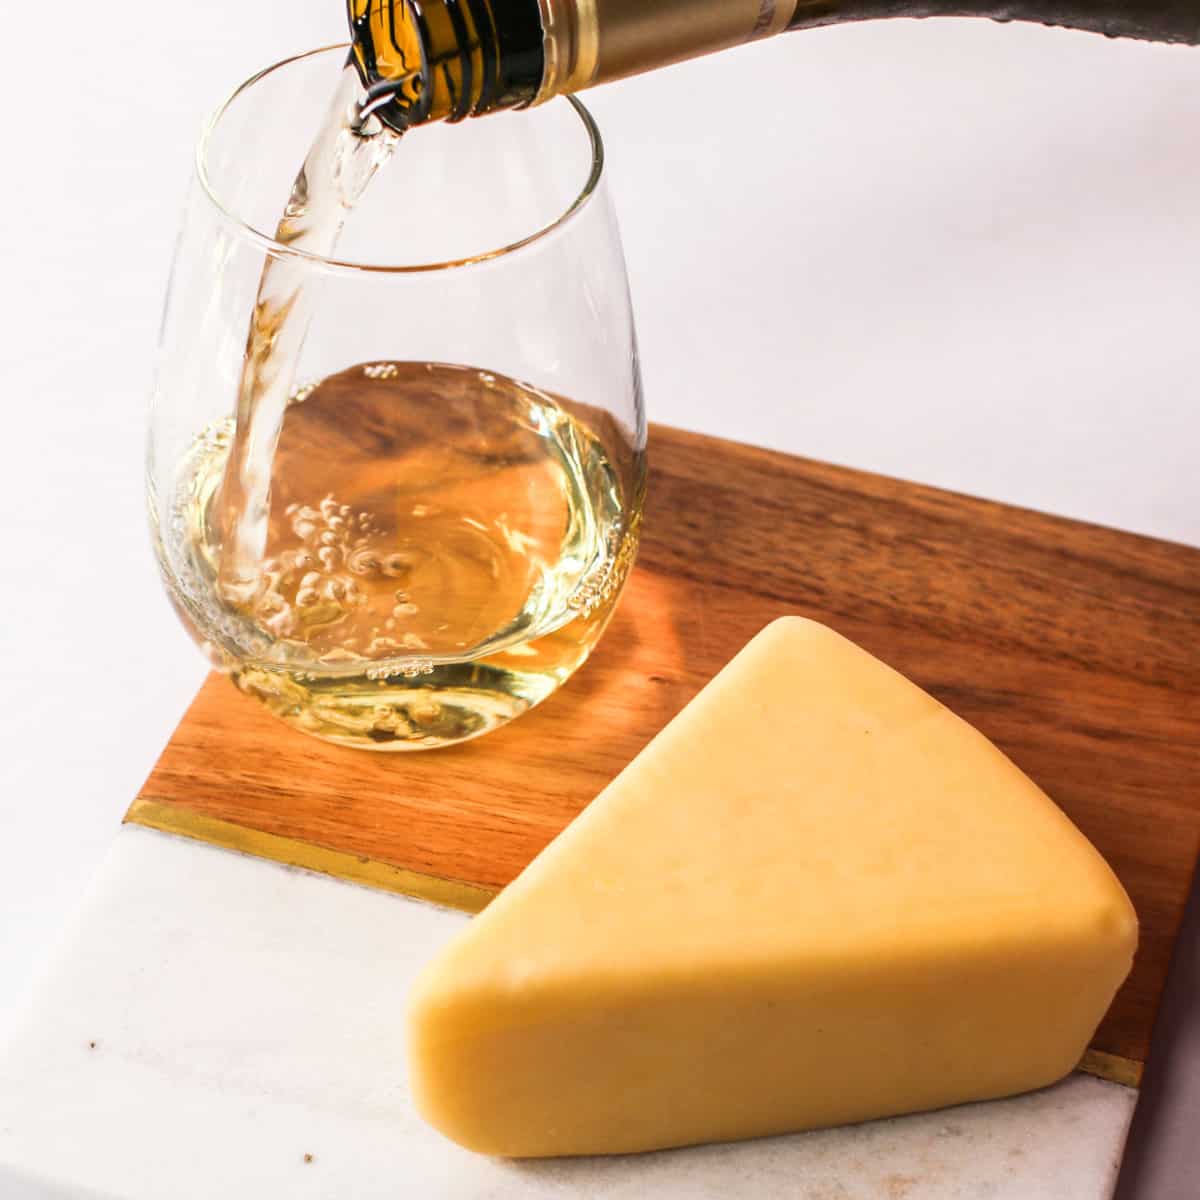 jack cheese paired with california chardonnay